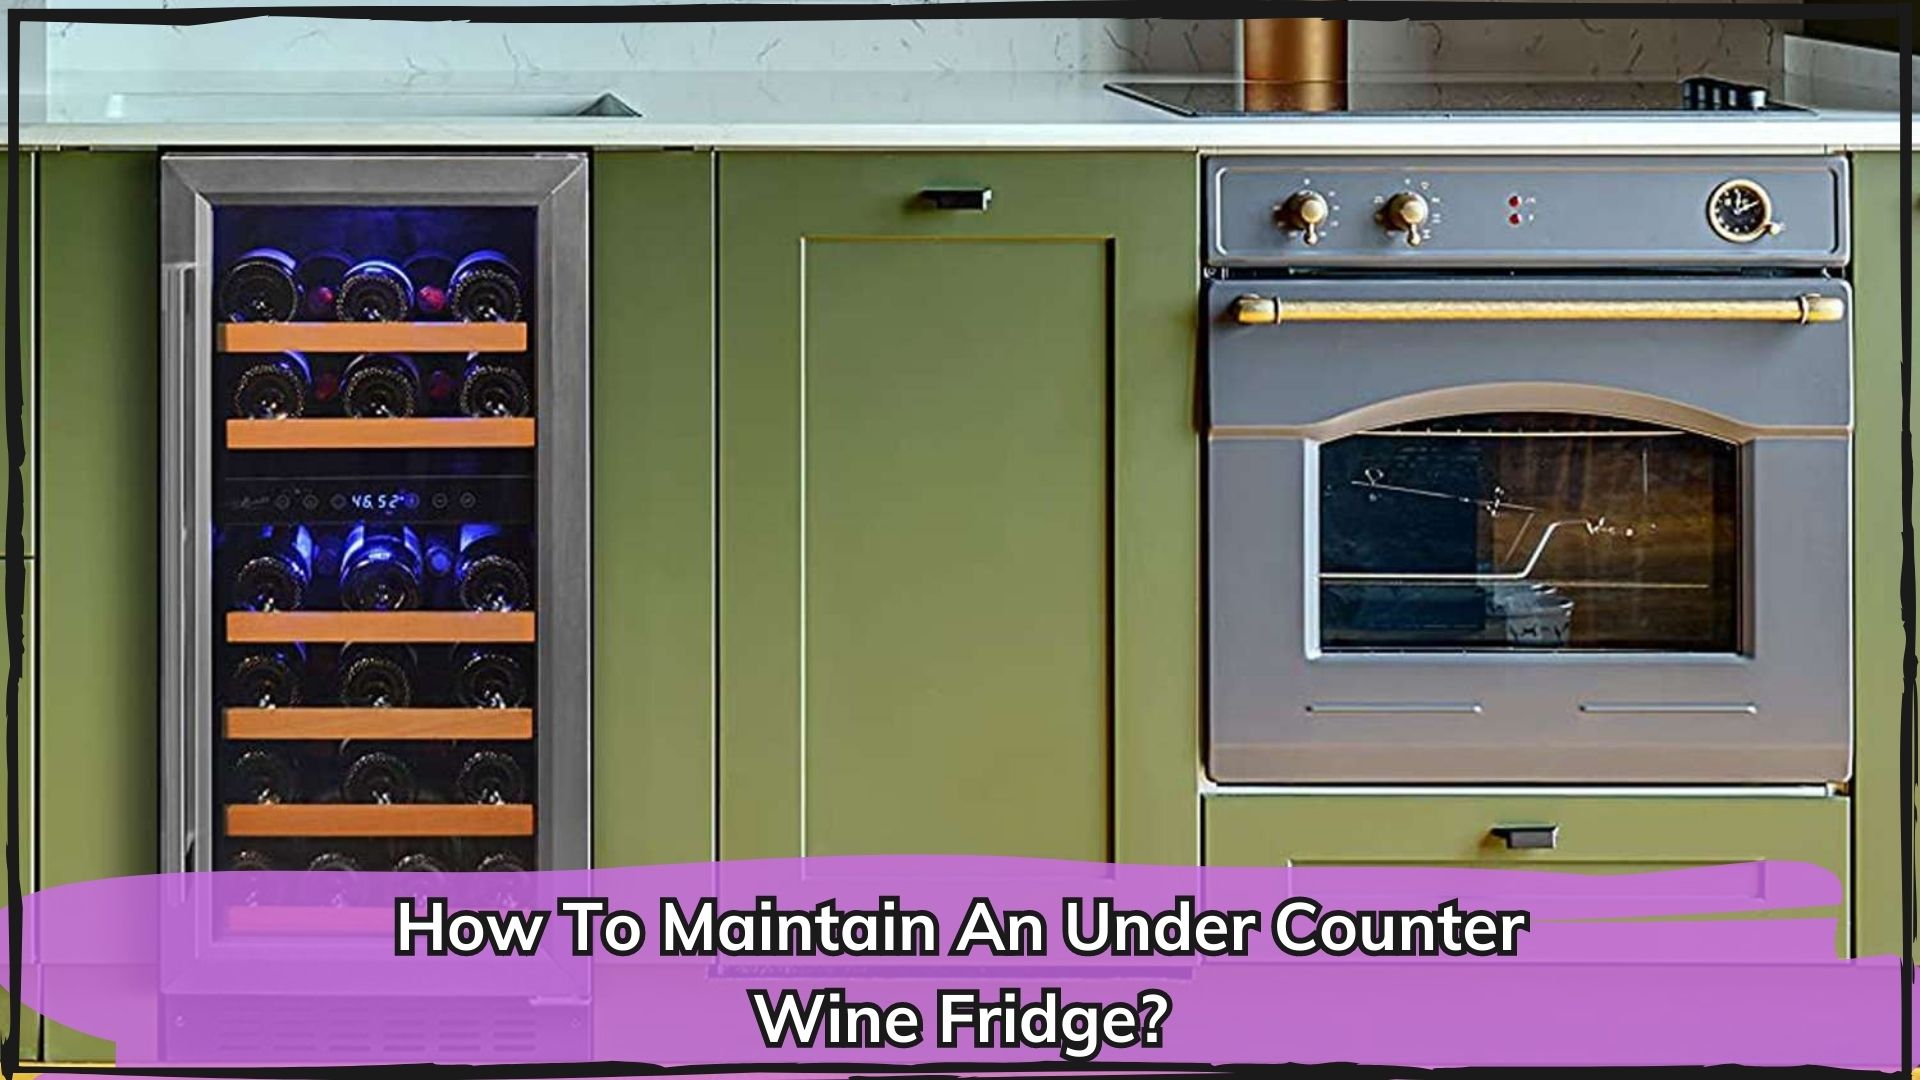 How To Maintain An Under Counter Wine Fridge?